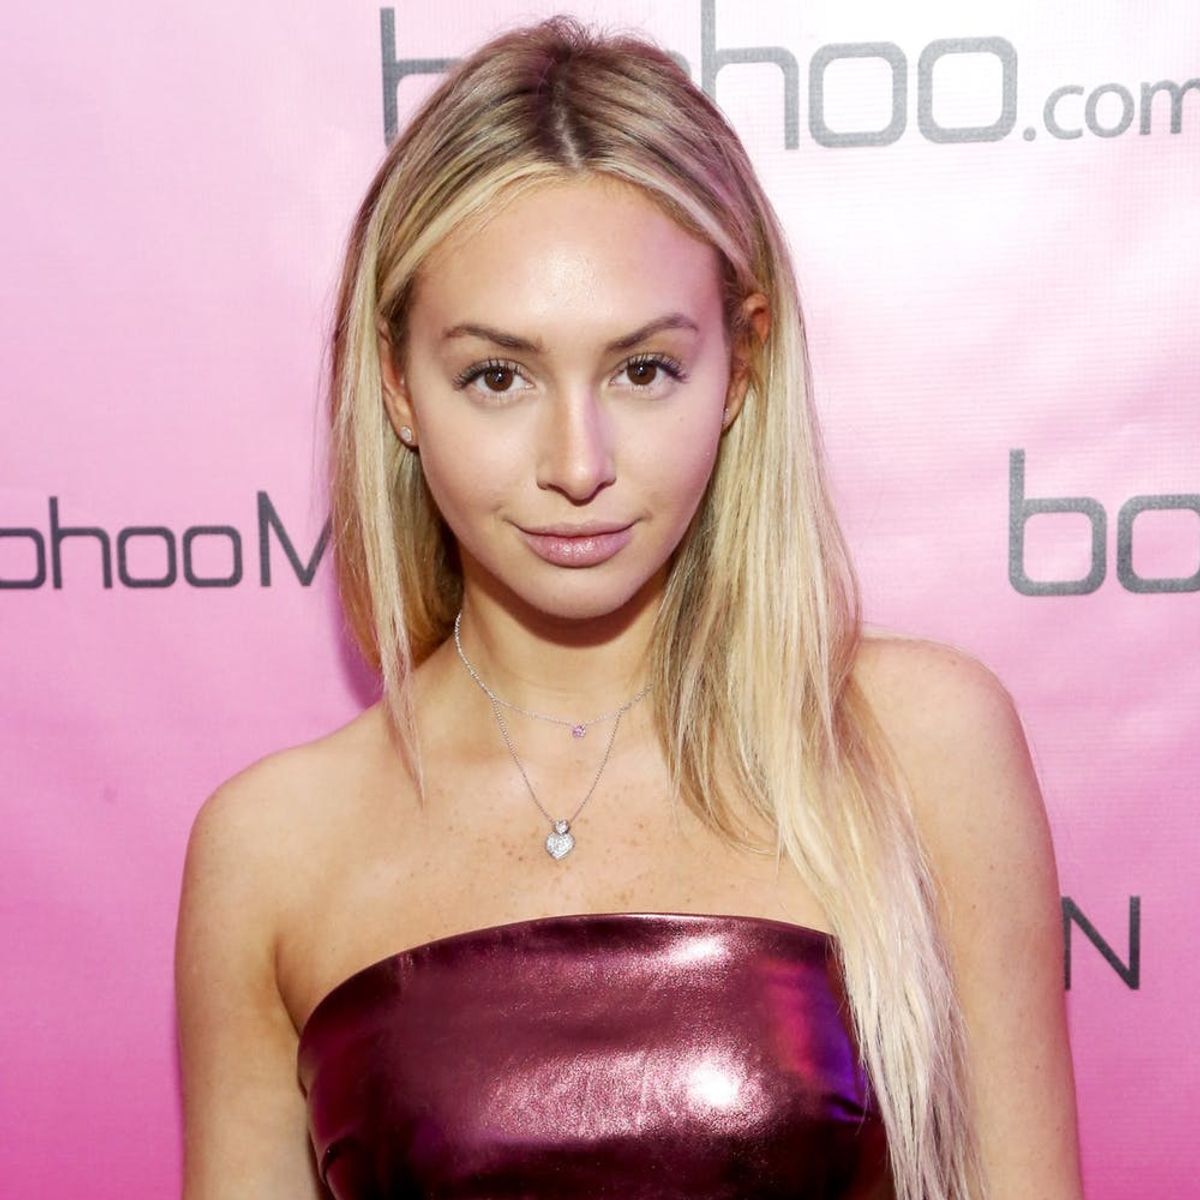 Corinne Olympios Just Revealed She Got Engaged After “The Bachelor”